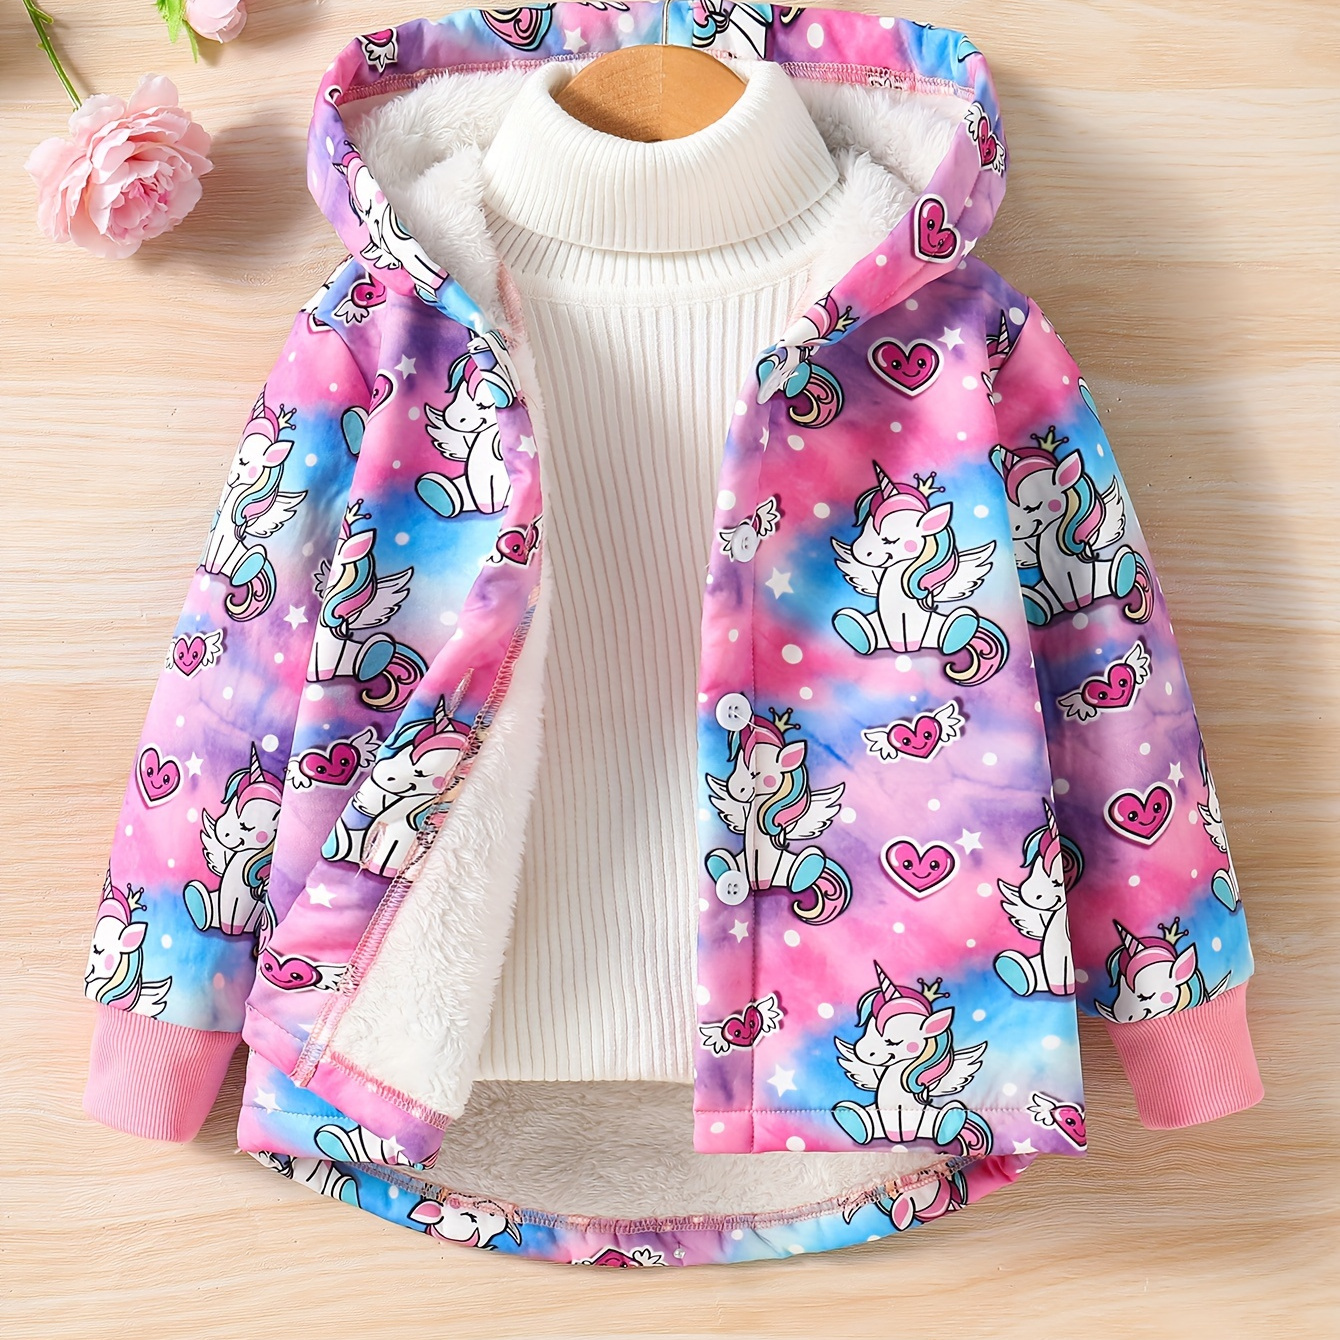 

Unicorn Print Winter Girls Hooded Cartoon Pattern Button Hoodie Jacket With Polar Fleece Lining, For Party Going Out